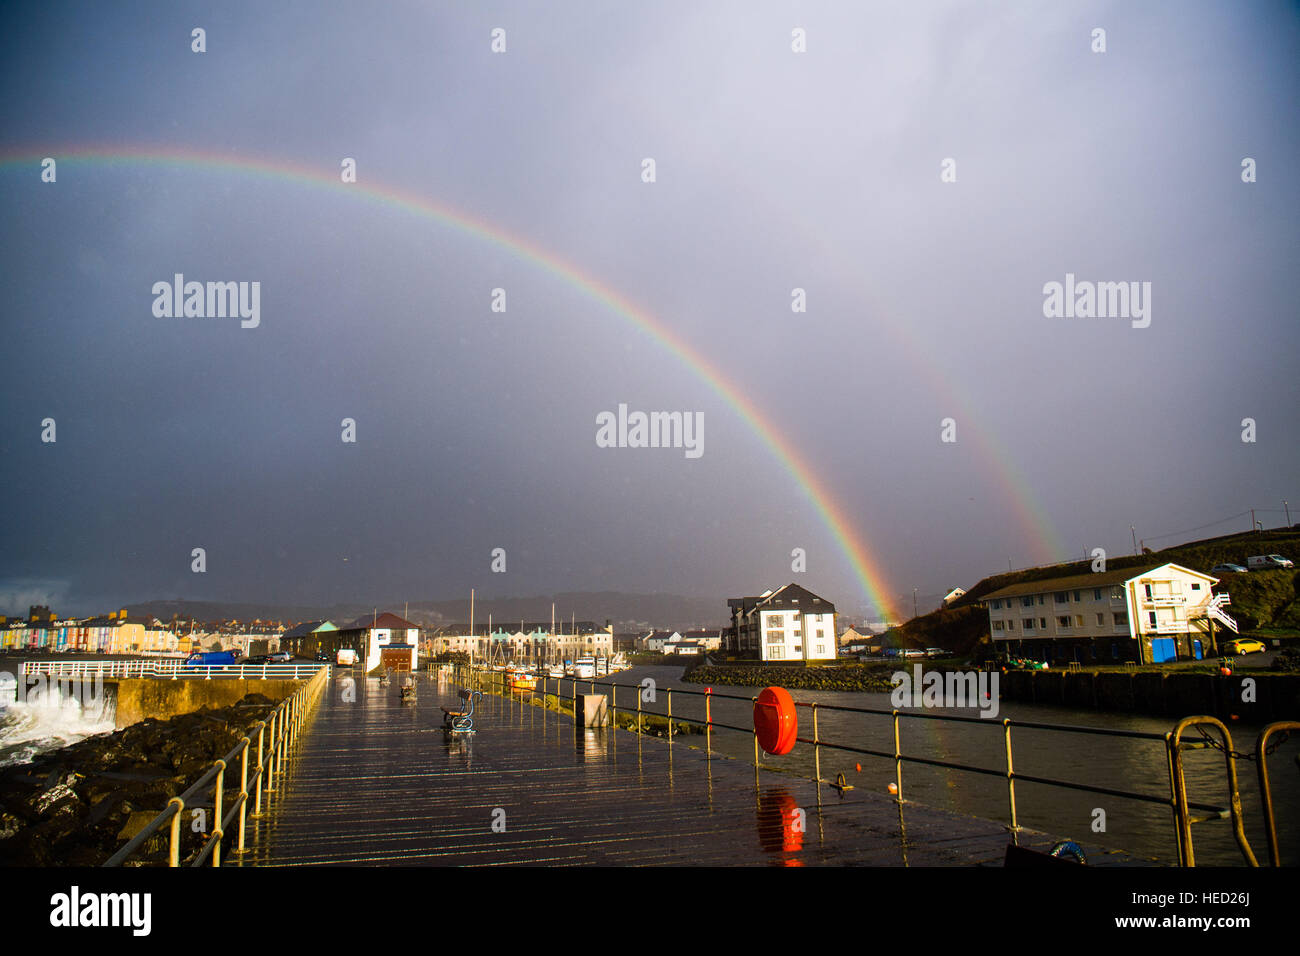 Aberystwyth, Wales, UK. 21 December 2016. UK Weather. On the shortest day of the year, the Winter Solstice, a change in the weather brings showers of rain and gusty winds combined with the high tide to drive huge waves to batter the seafront and harbor wall at Aberystwyth on the Cardigan Bay coast of the Irish Sea in West Wales UK In a brief respite from the rain, a rainbow forms over the town and stormy seas photo © Keith Morris/Alamy Live News Stock Photo